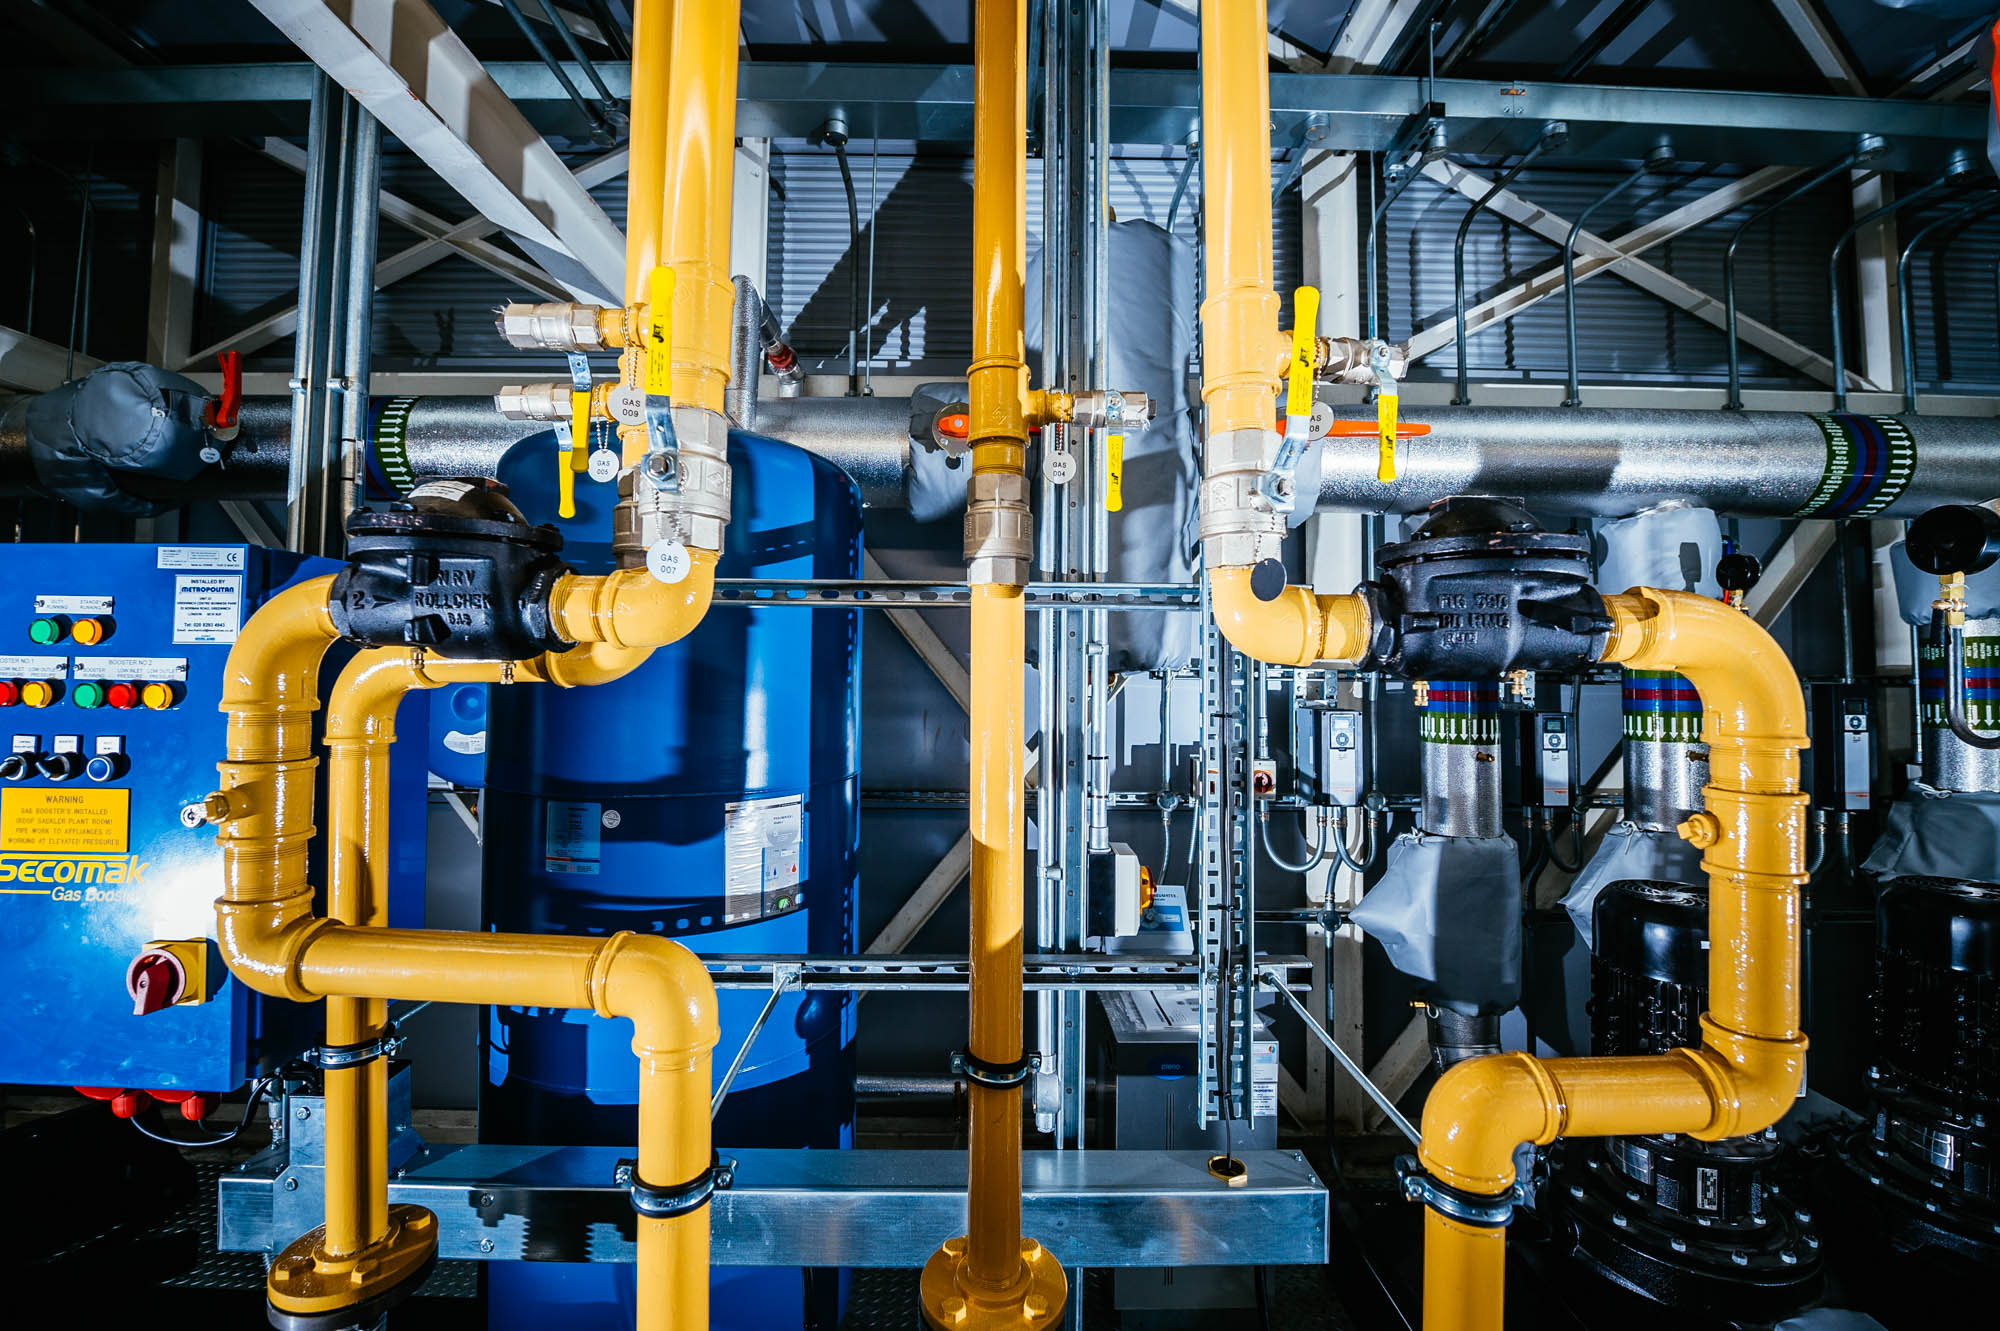 A photo of yellow and blue pipework at above an art gallery